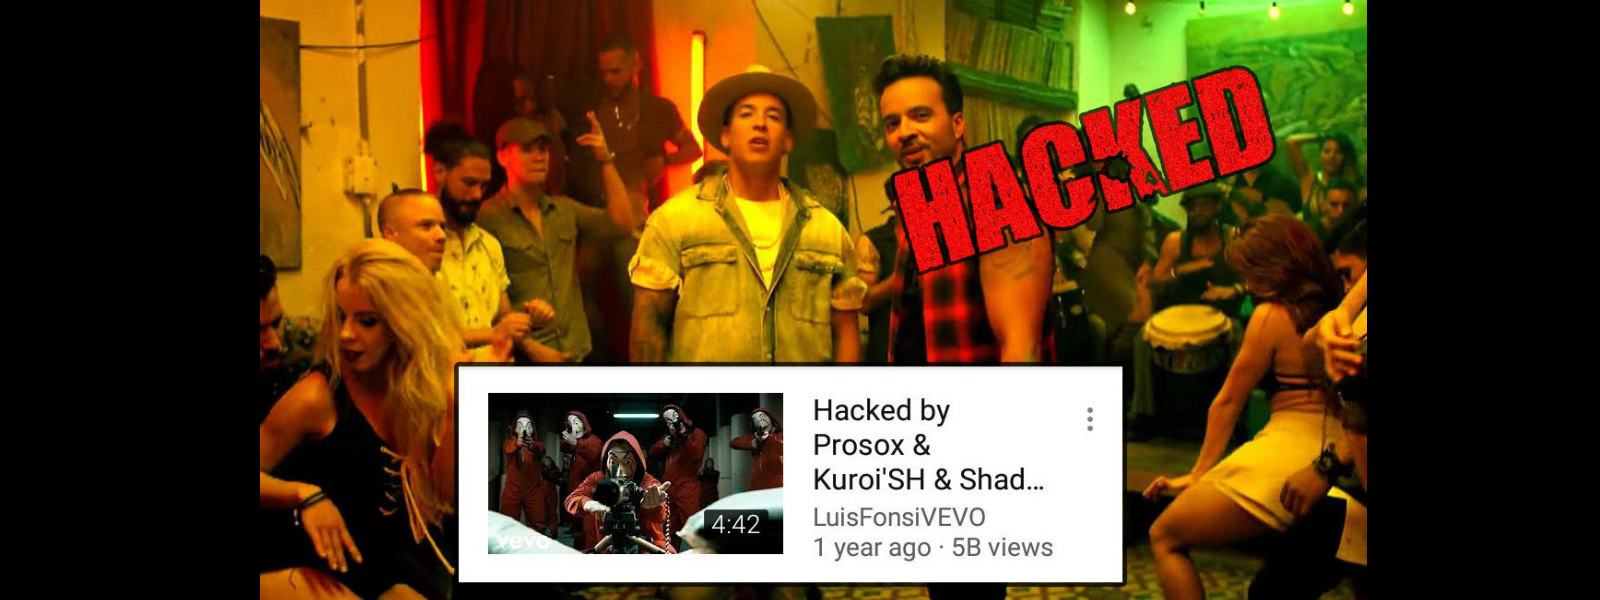 2017 hit Despacito YouTube video hacked